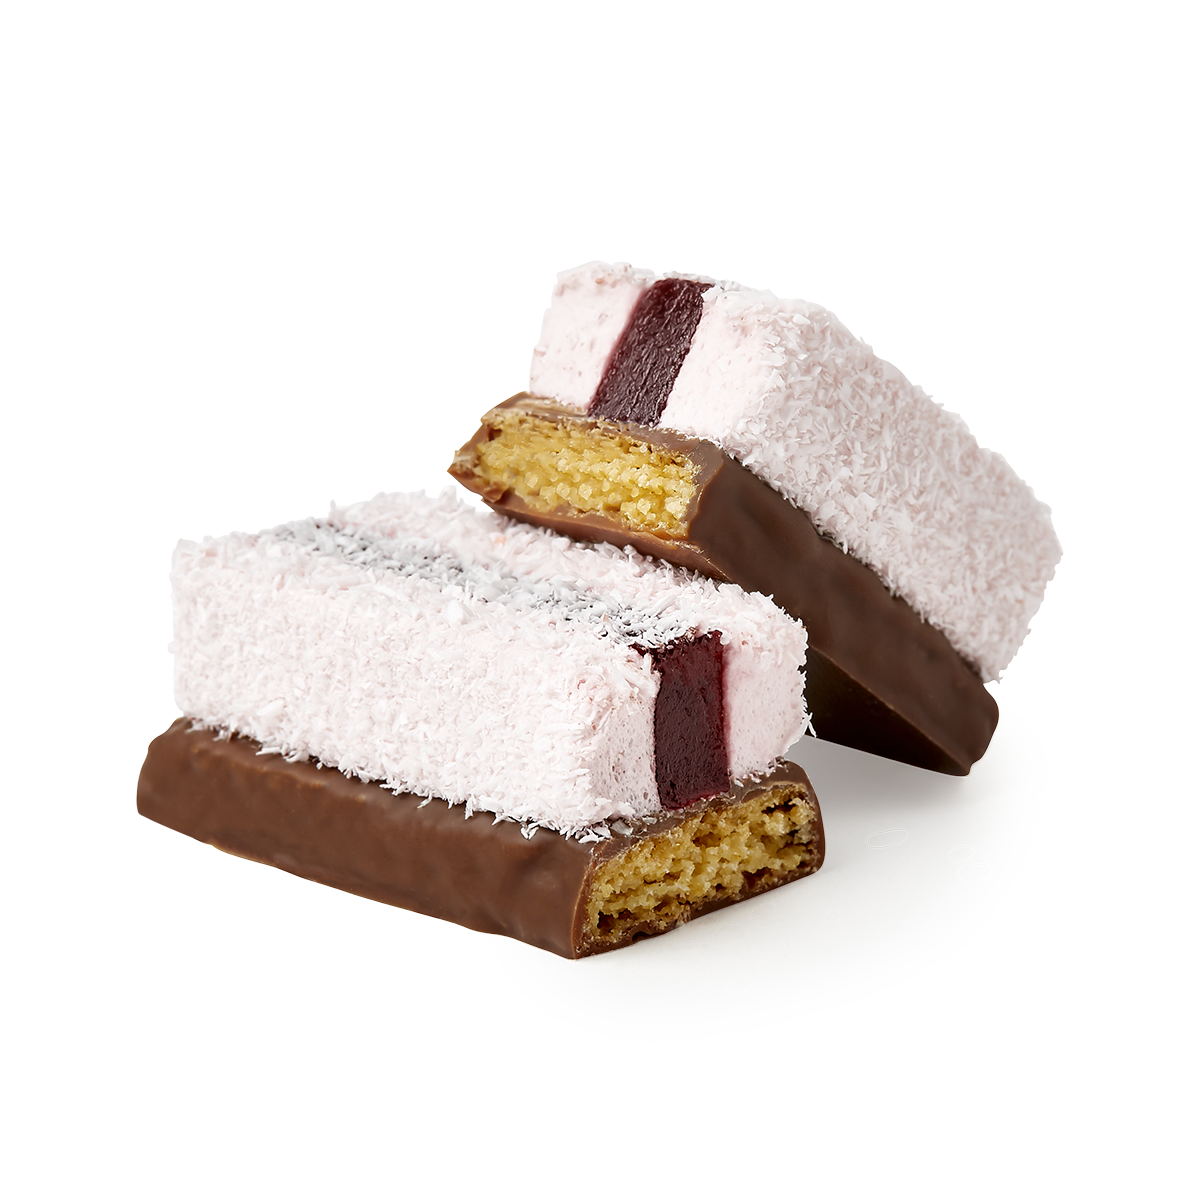 Cross section of chocolate slice showing biscuit, jelly and coconut layers